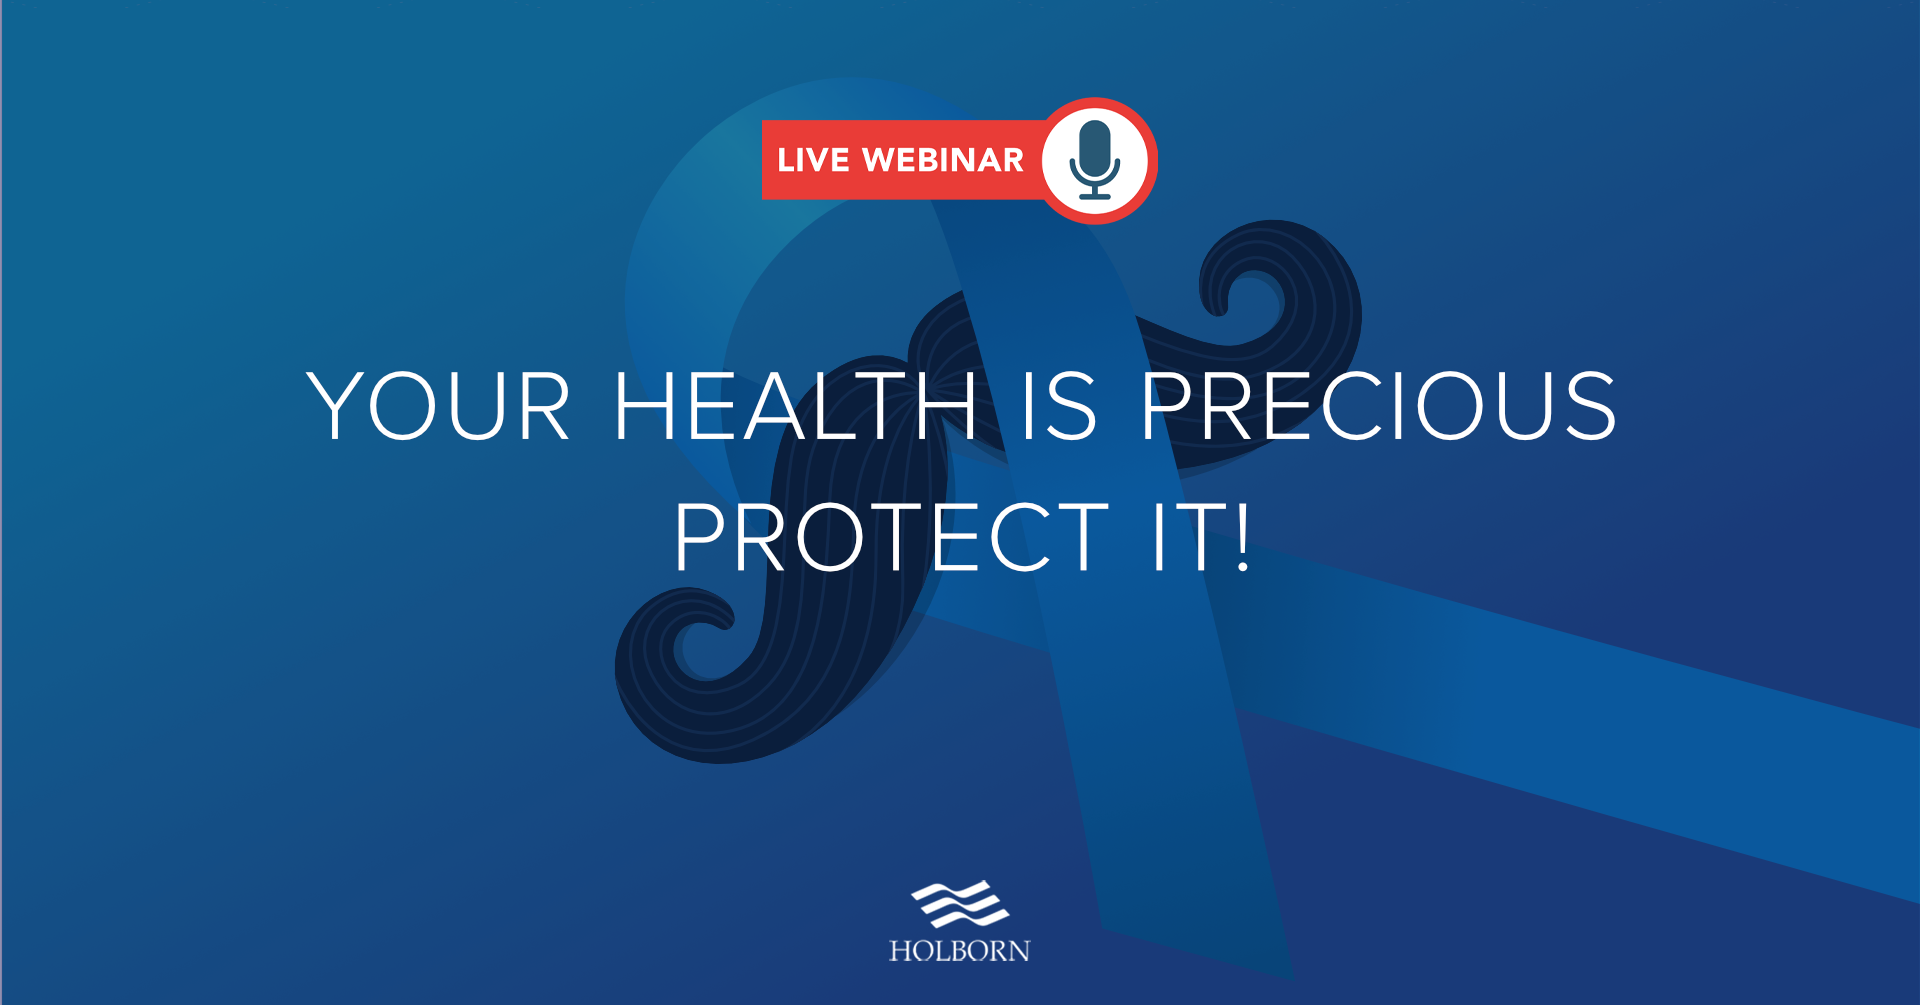 Live Webinar: Your Health is Precious, Protect It